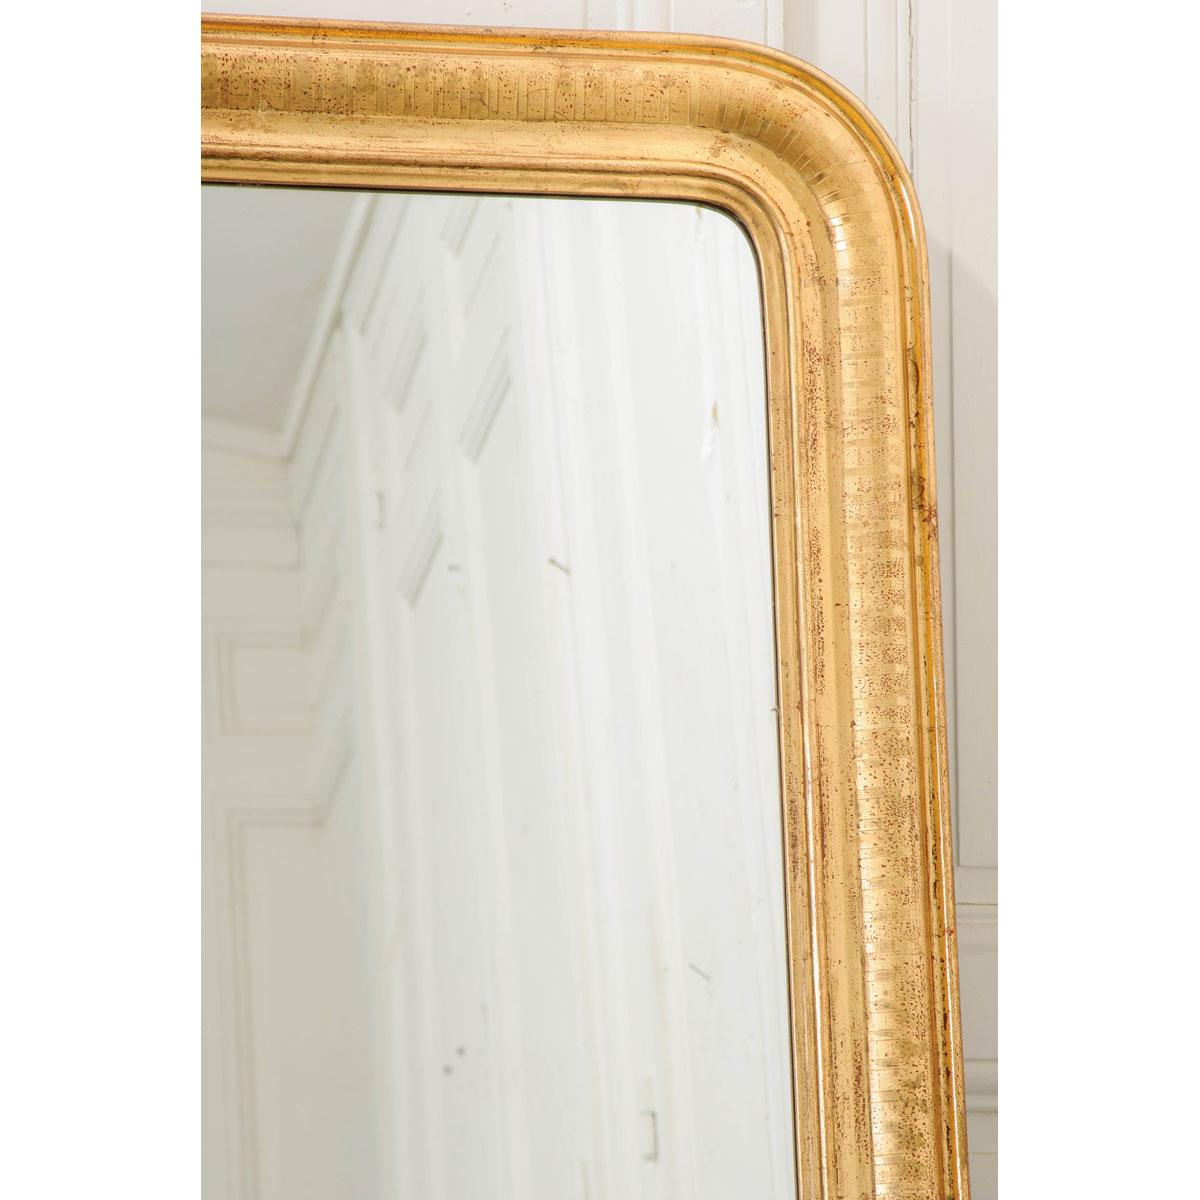 french mirrors reproduction